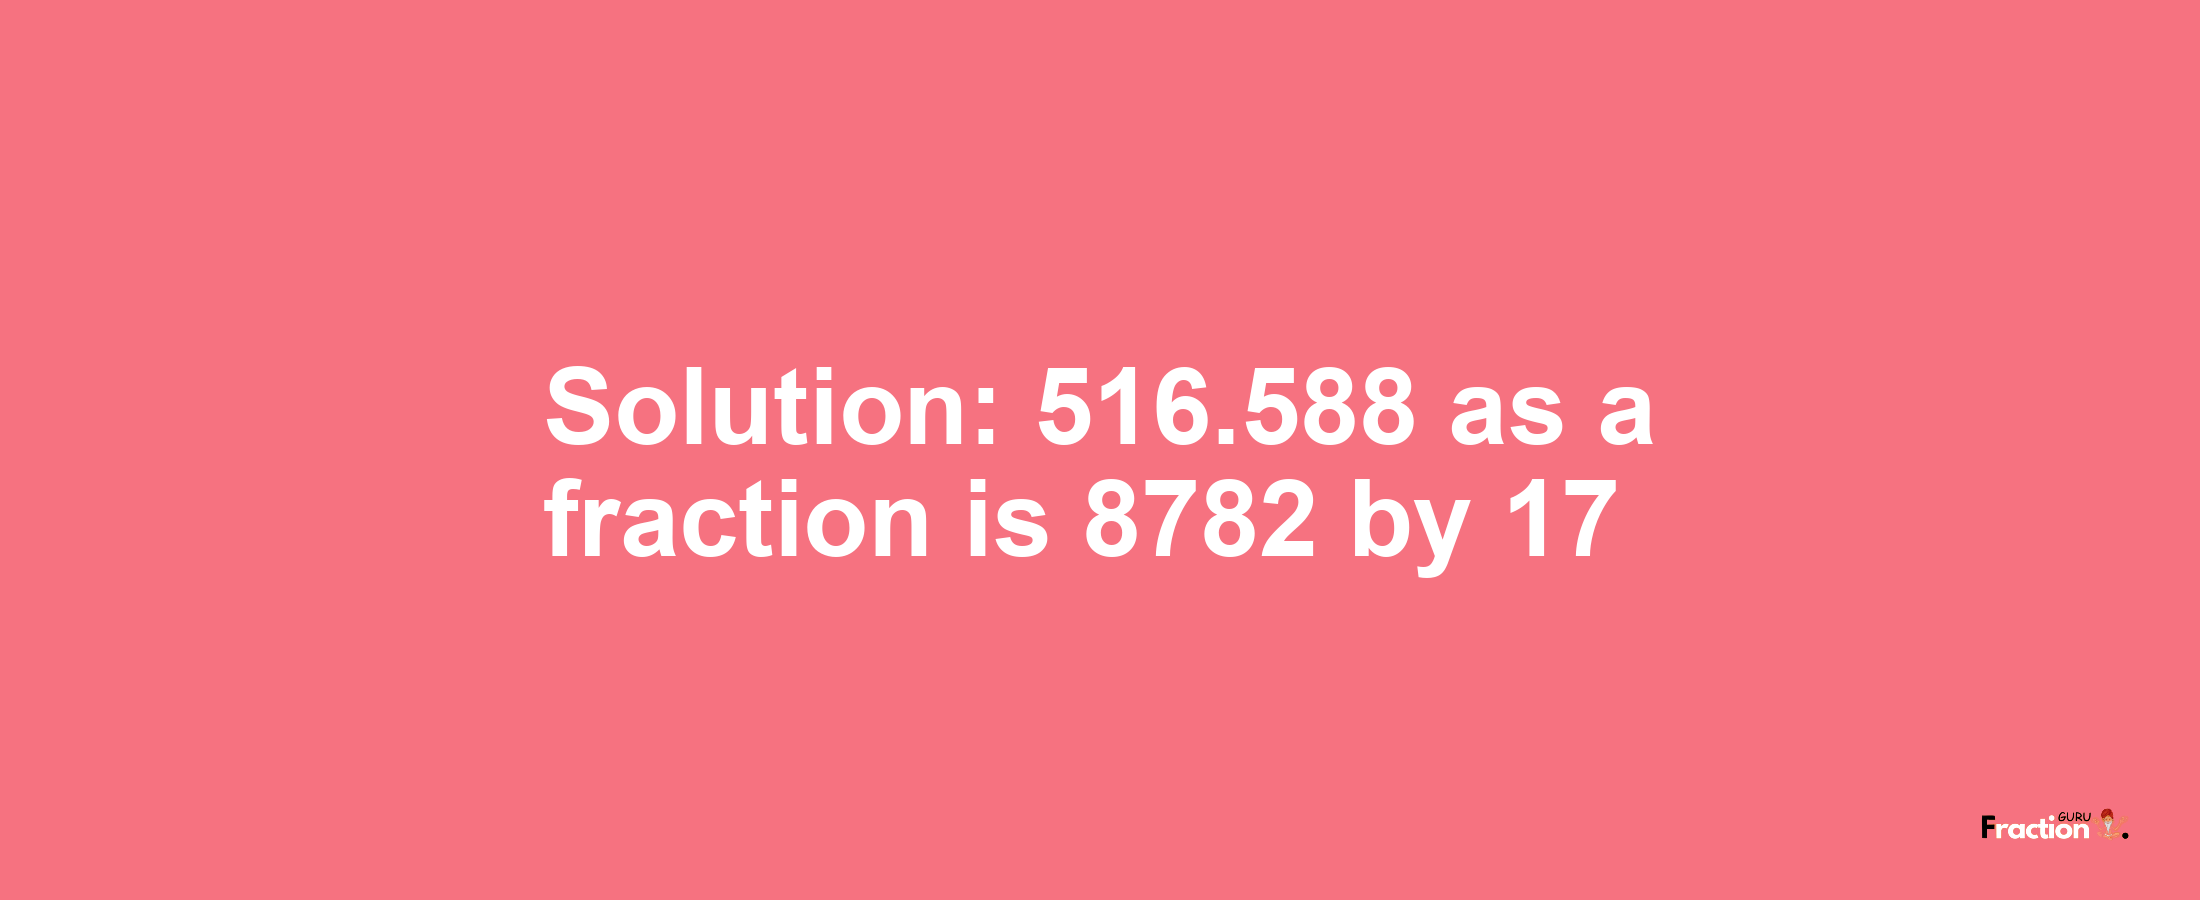 Solution:516.588 as a fraction is 8782/17